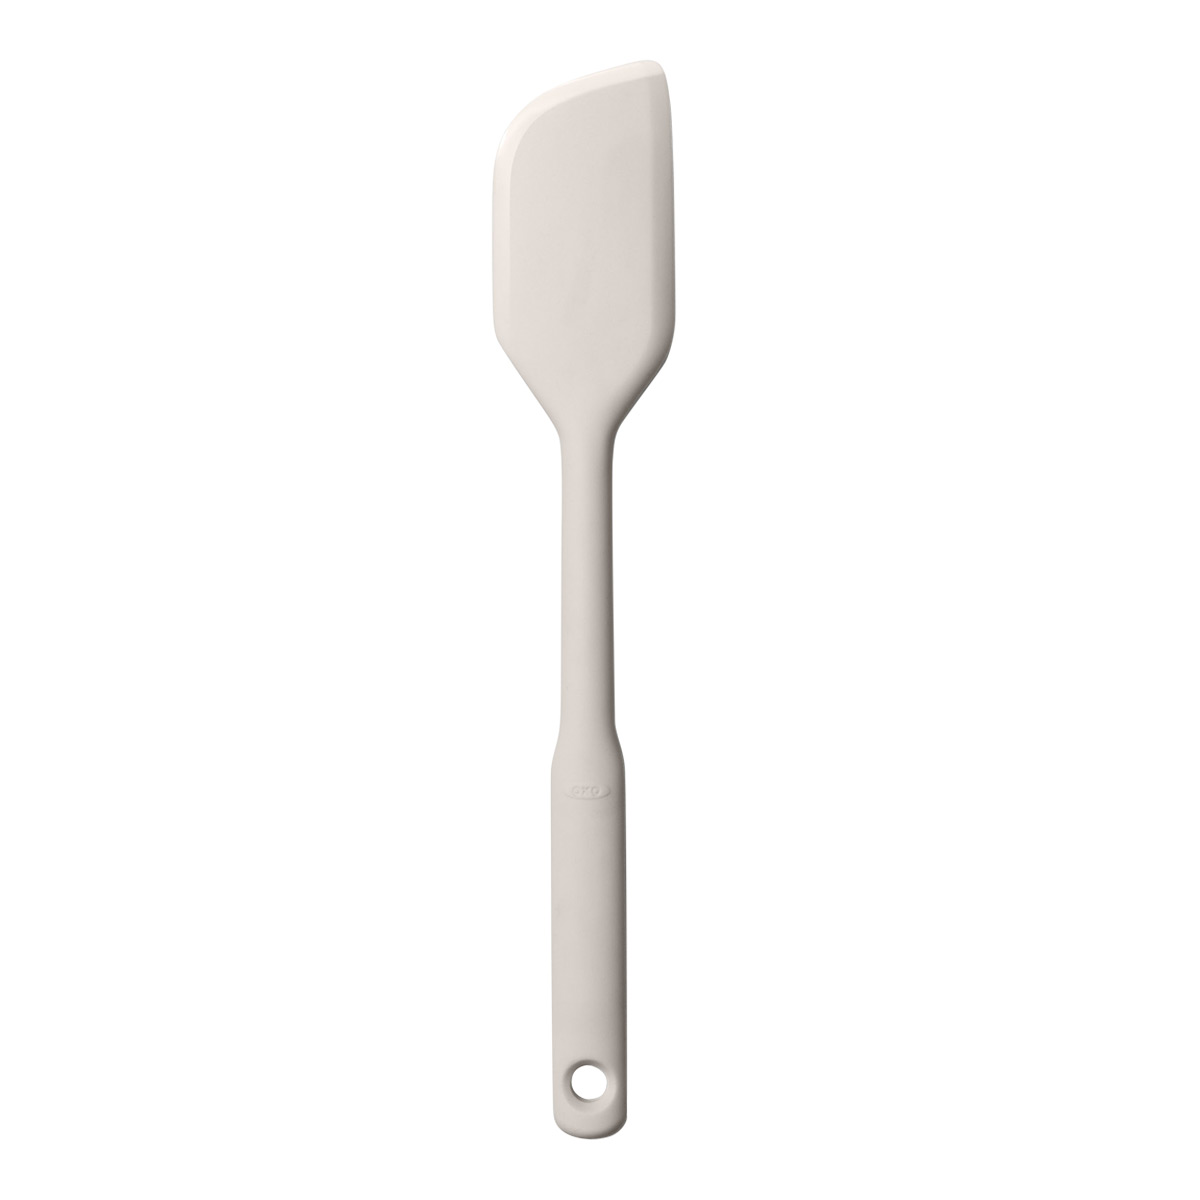 https://www.containerstore.com/catalogimages/427583/10087975-Medium-Silicone-Spatula-VEN.jpg